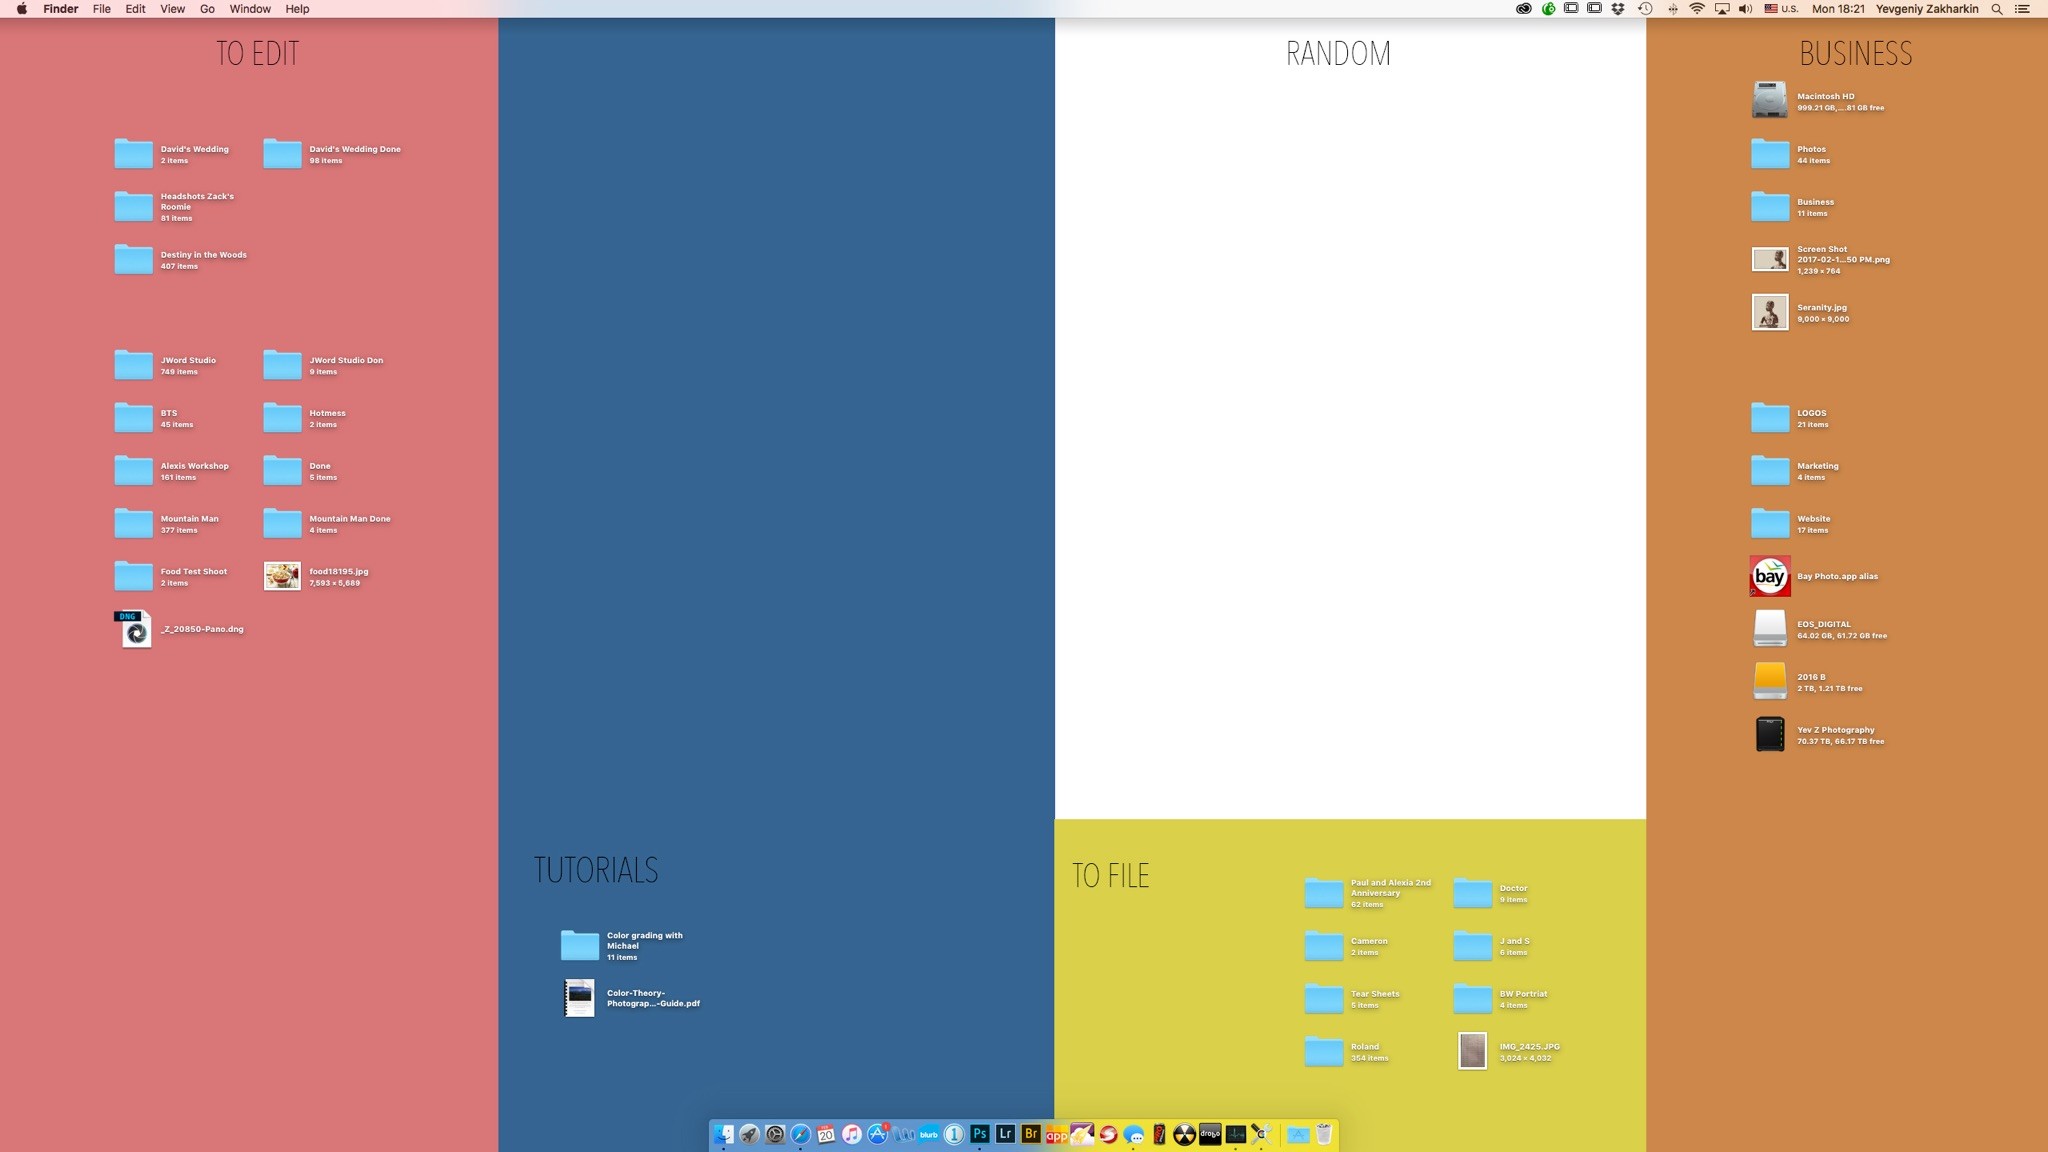 2048x1152 A Simple Way to Add Some Organization to Your Desktop